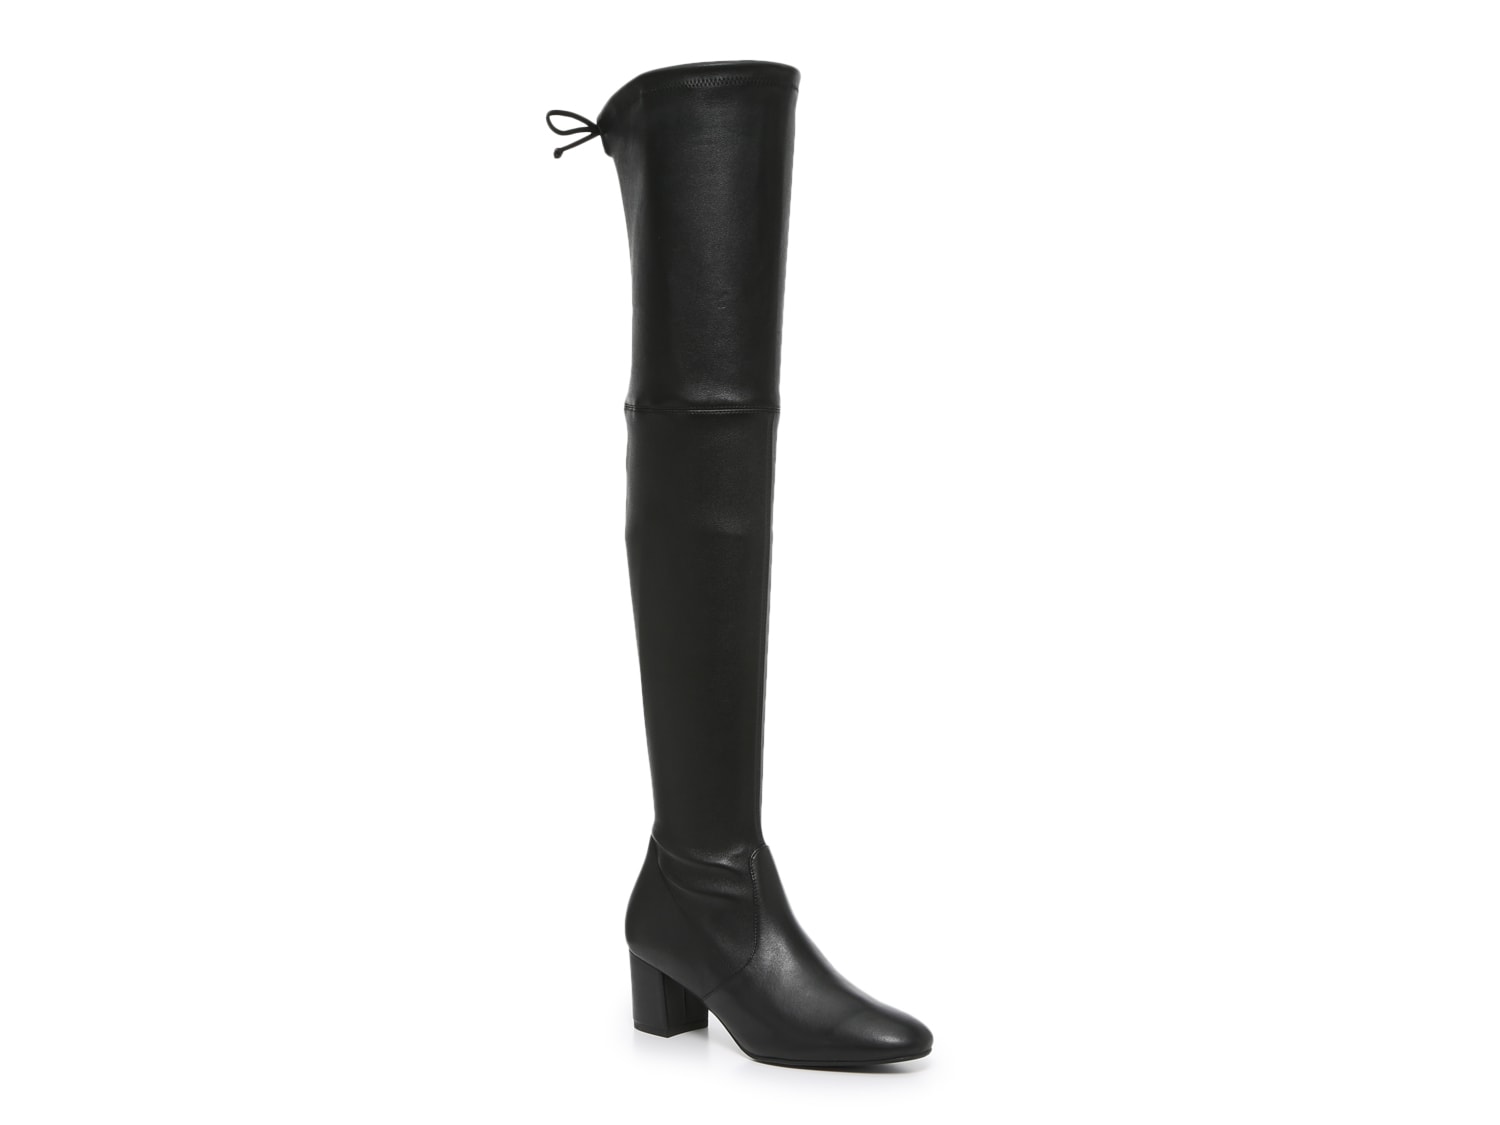 Stuart Weitzman Genna 60 Over-the-Knee Boot - Free Shipping | DSW